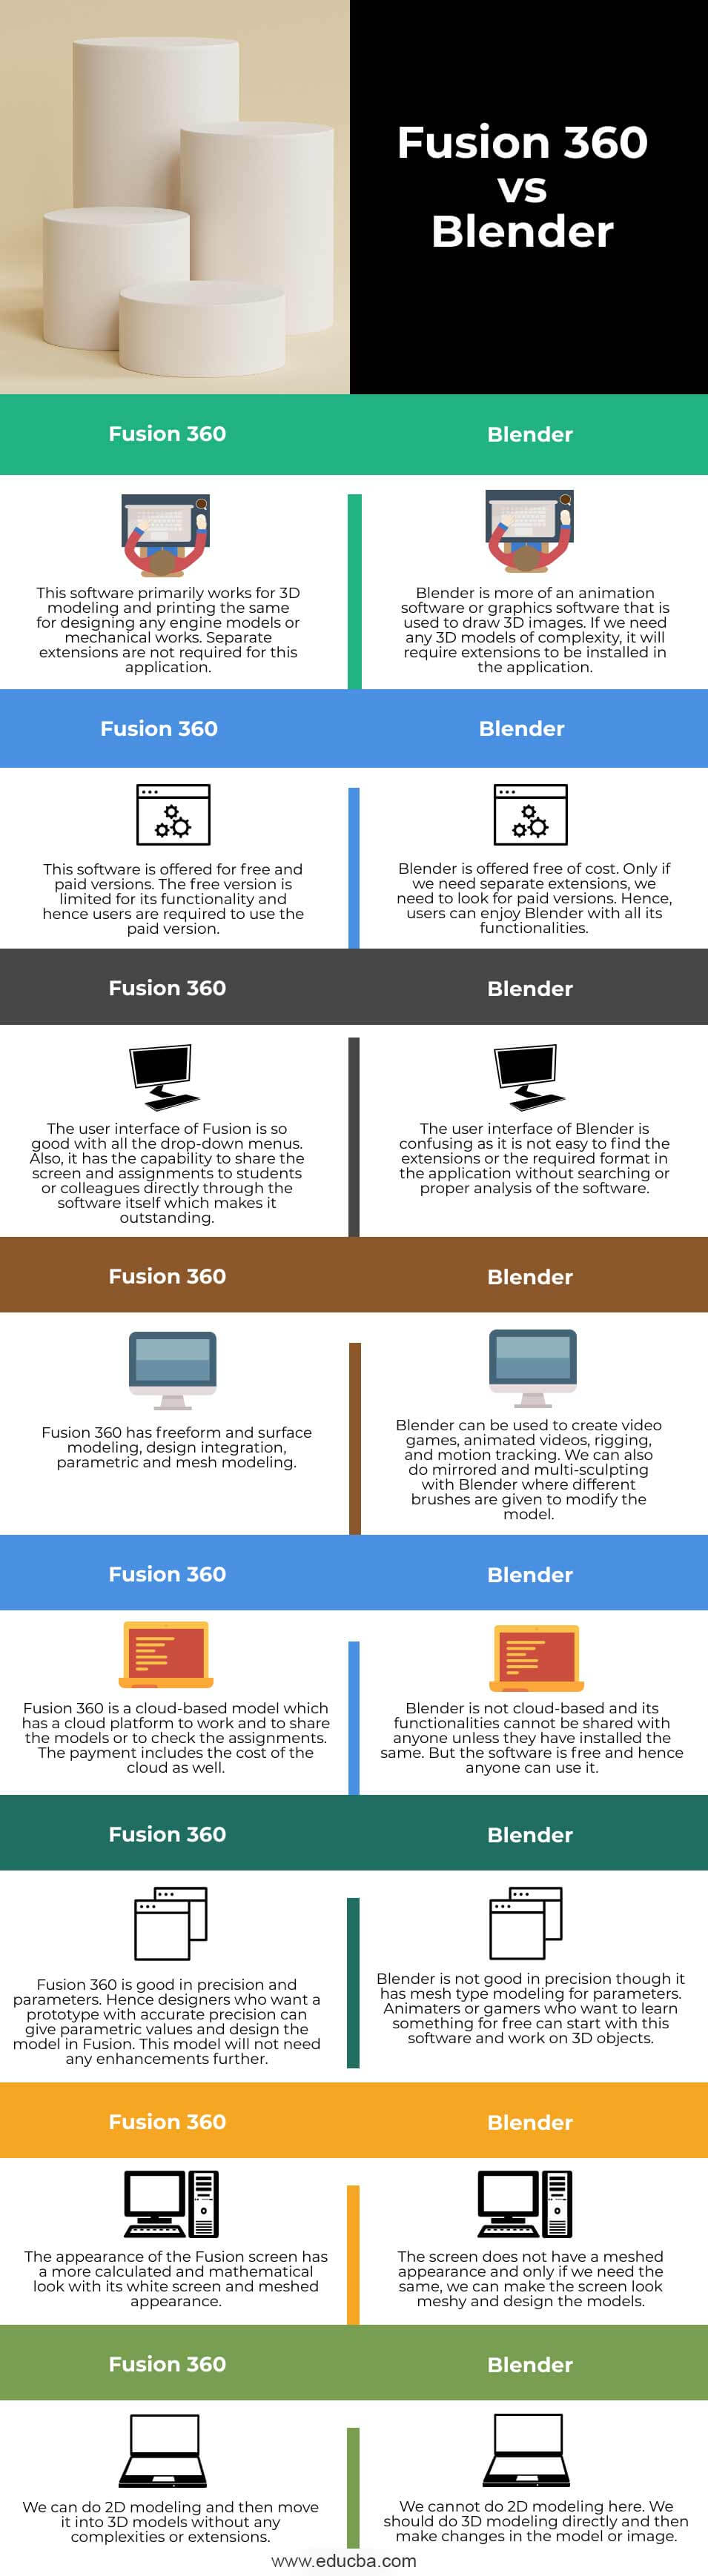 Fusion 360 vs Blender | Top 8 Differences You Should Know